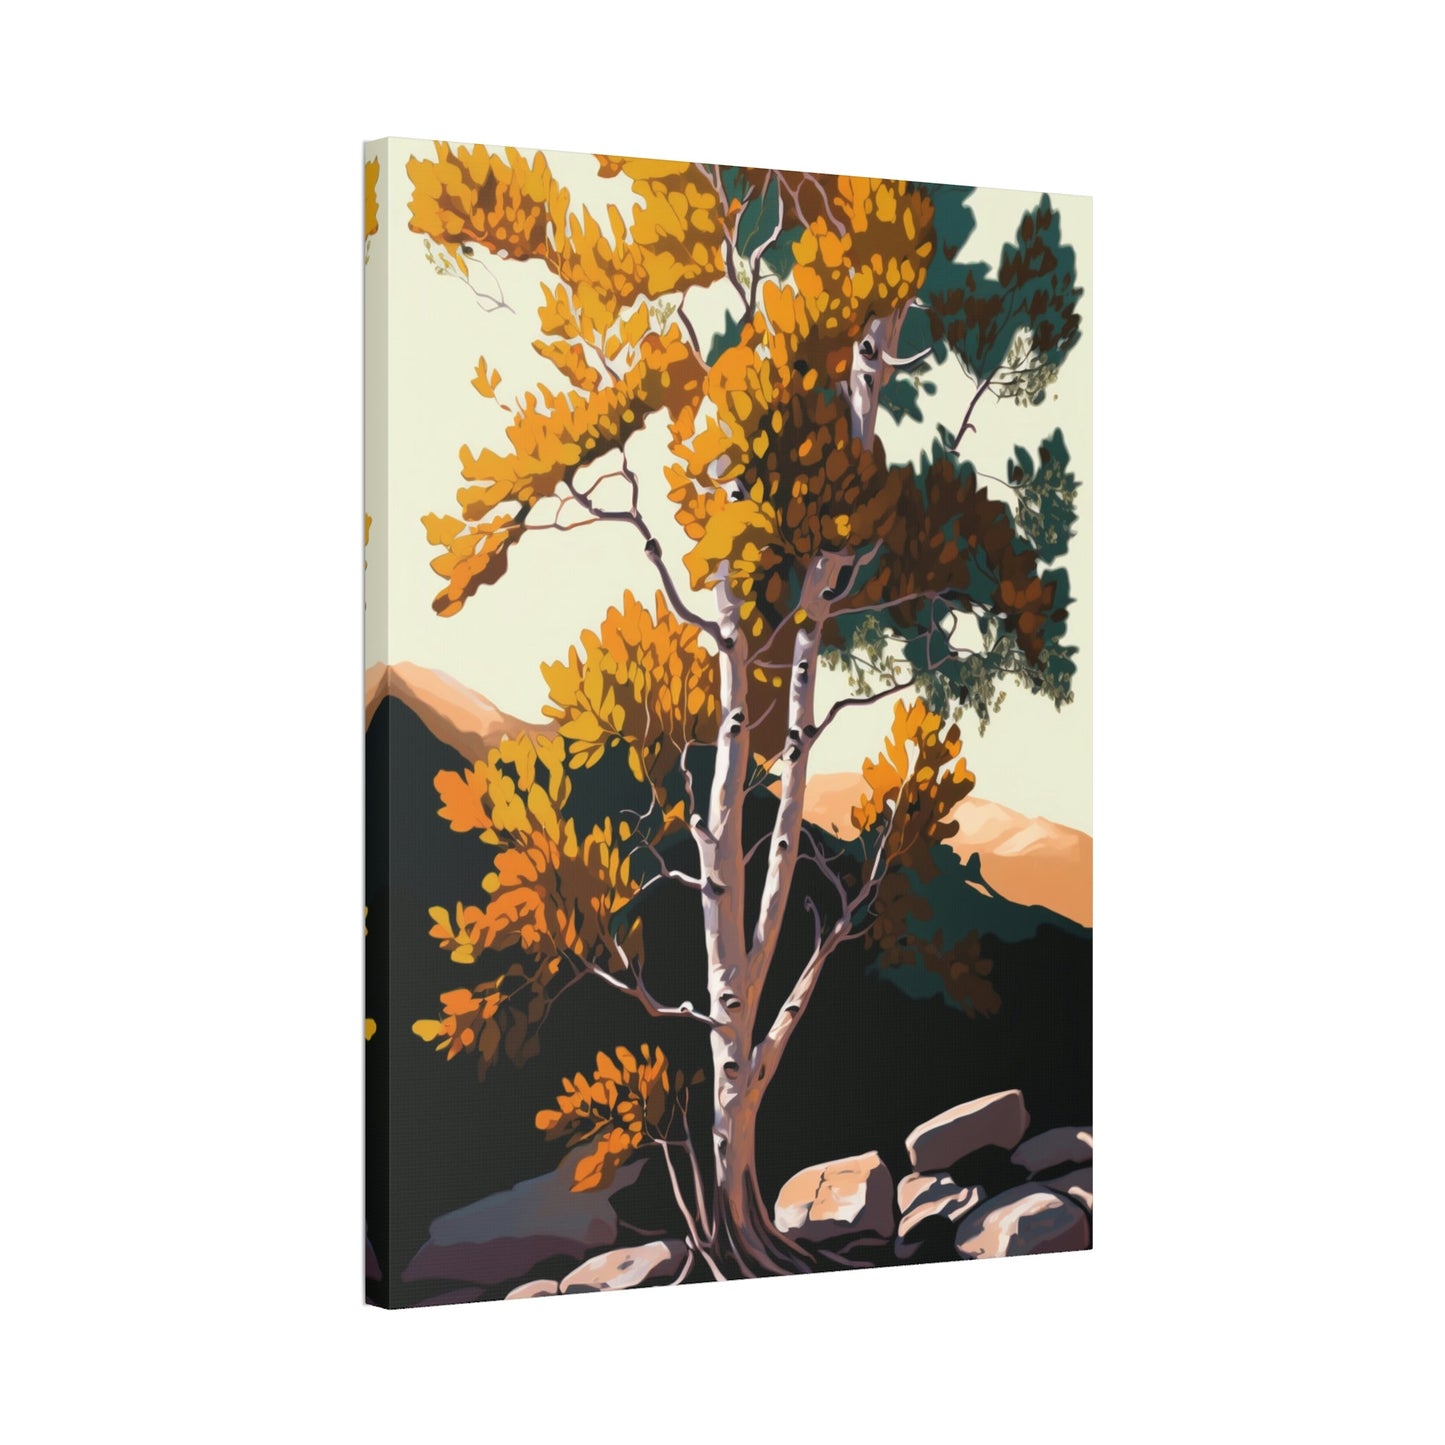 The Enchantment of Fall: Framed Canvas & Poster Print of Aspen Trees in the Forest